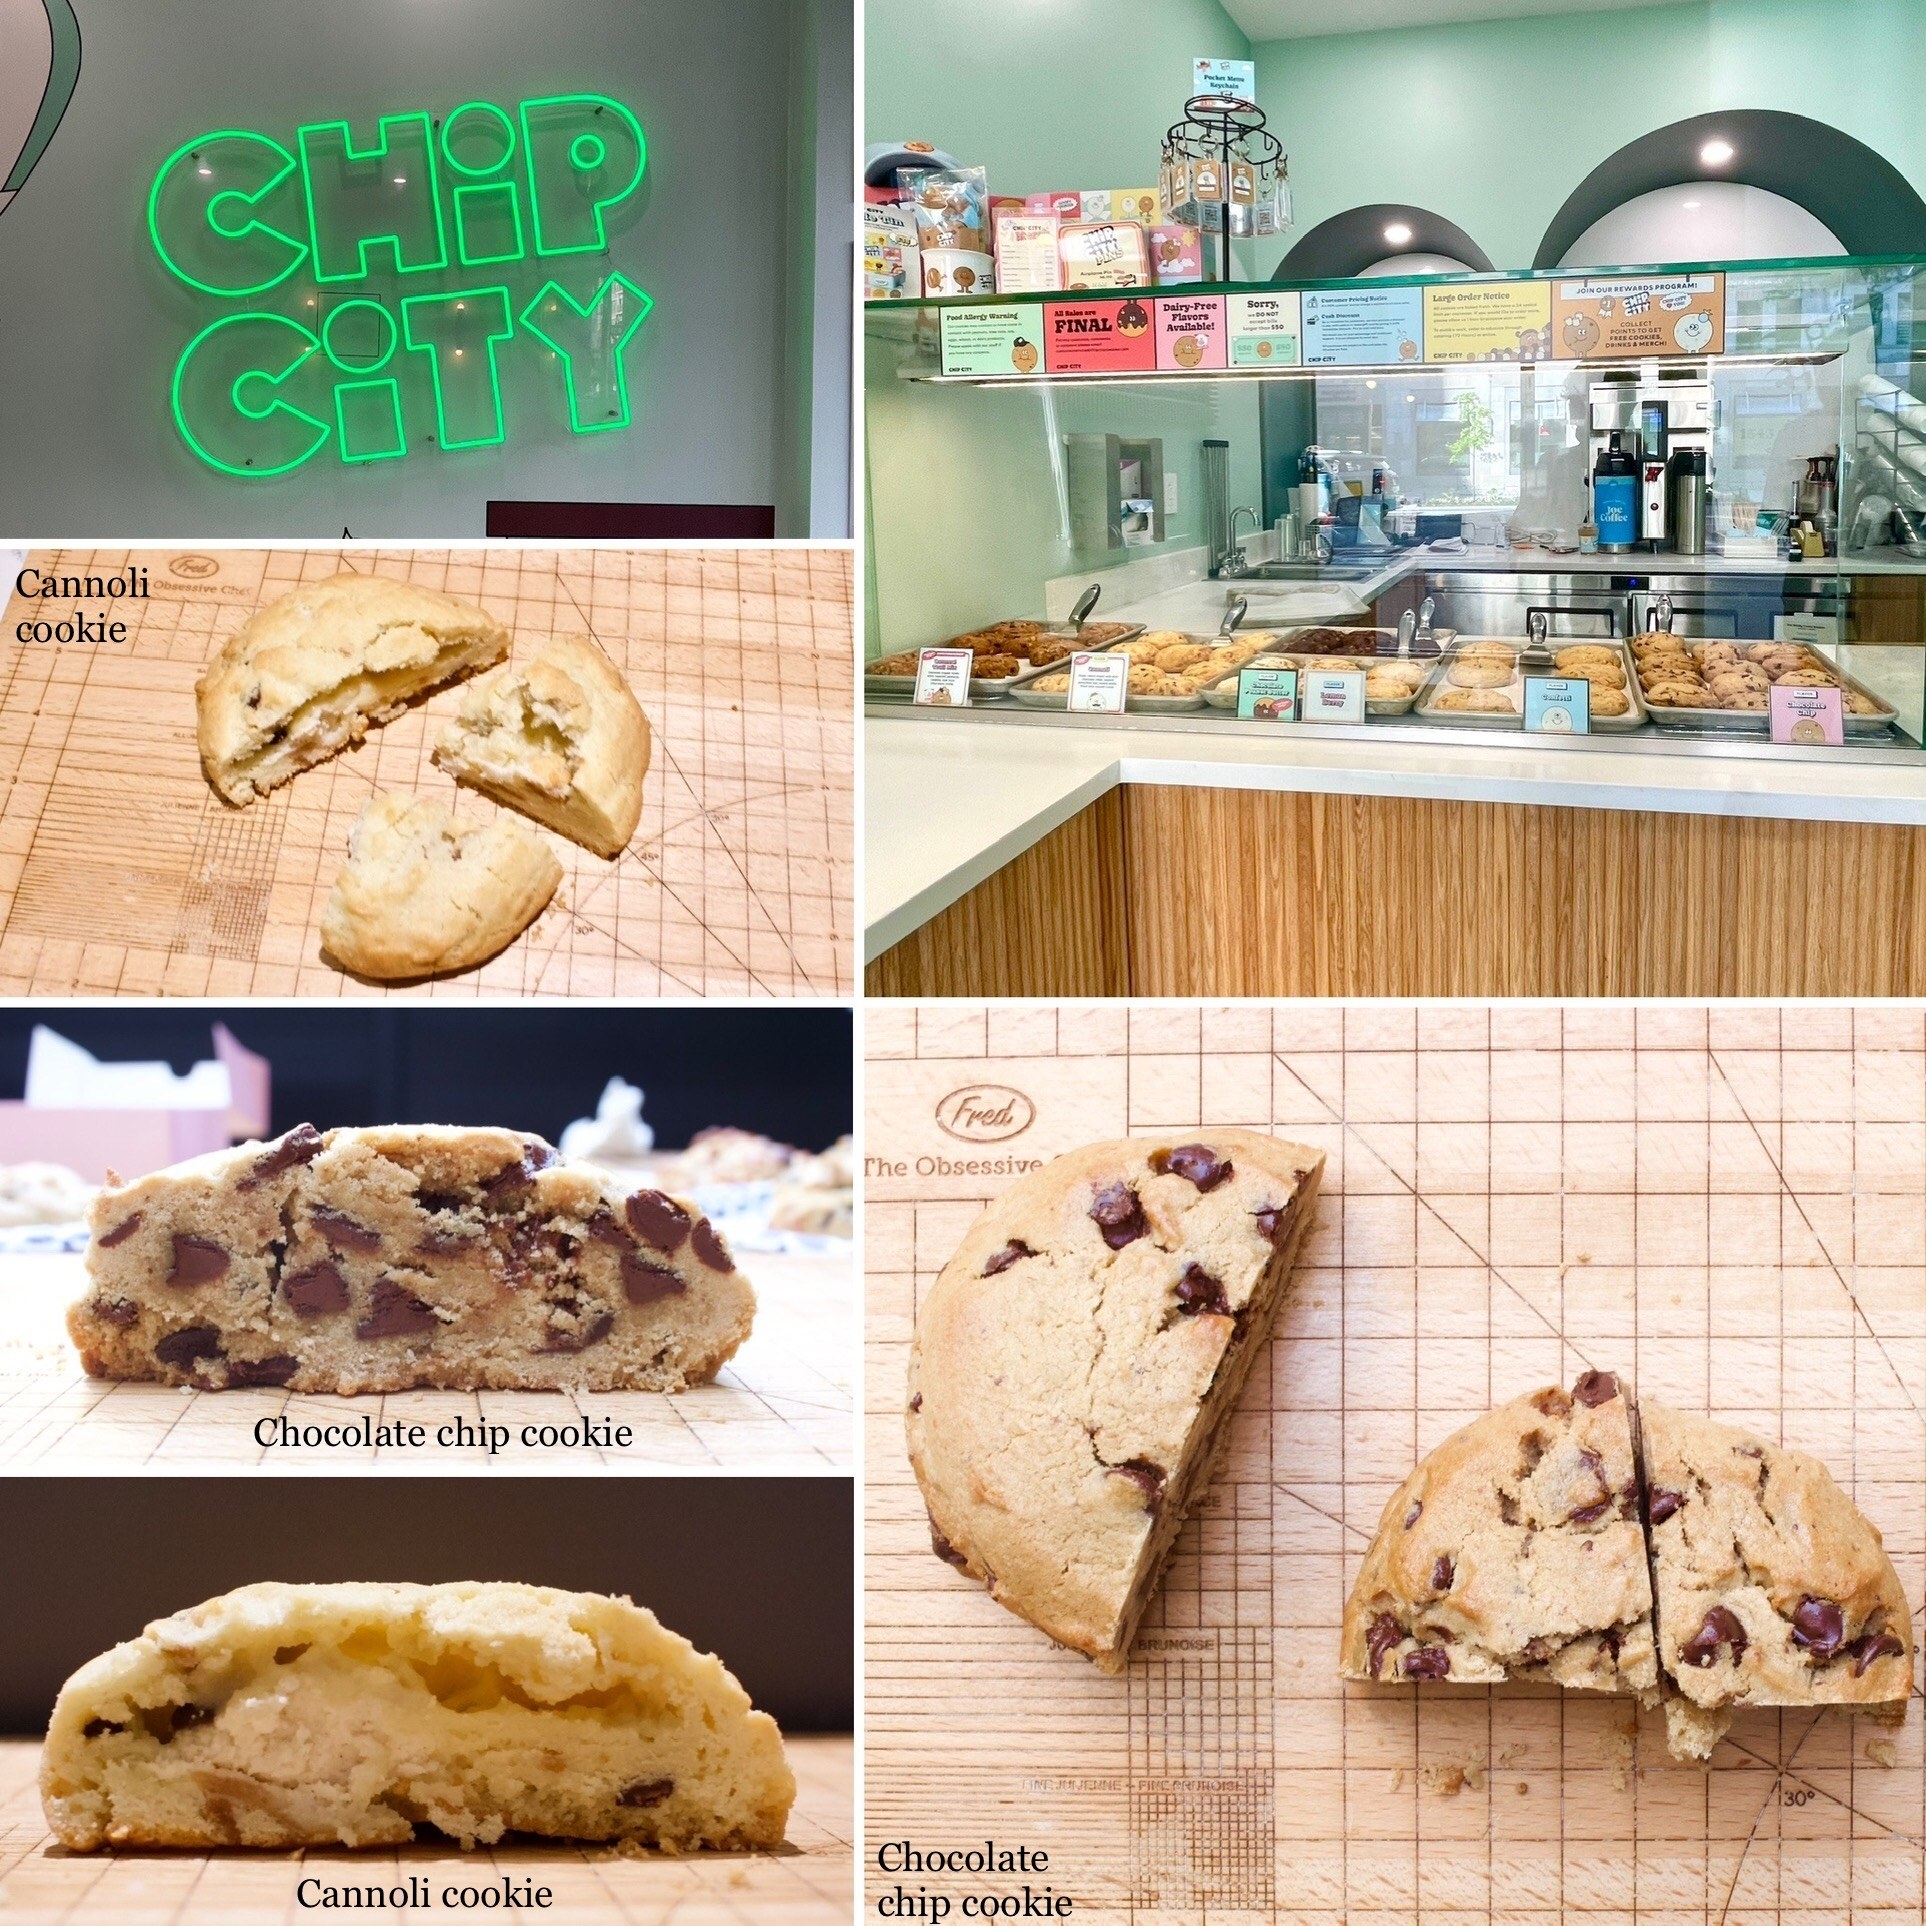 Clockwise from top left: green neon sign saying &quot;chip city&quot;; interior of bakery; chocolate chip cookie; cross section of cannoli cookie; cross section of chocolate chip cookie; cannoli cookie